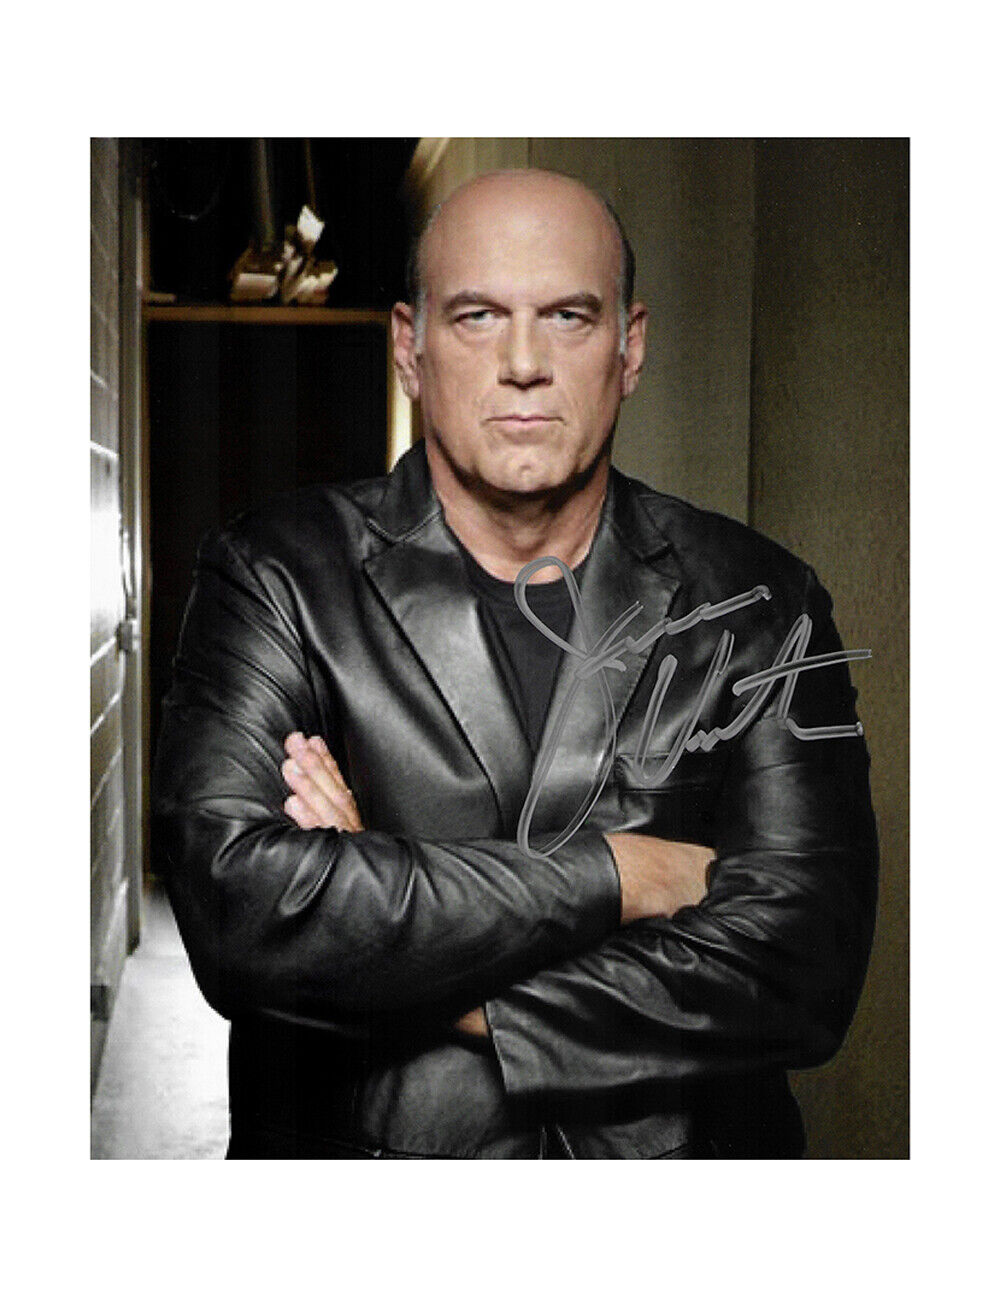 8x10 Print Signed By Jesse Ventura 100% Authentic With COA